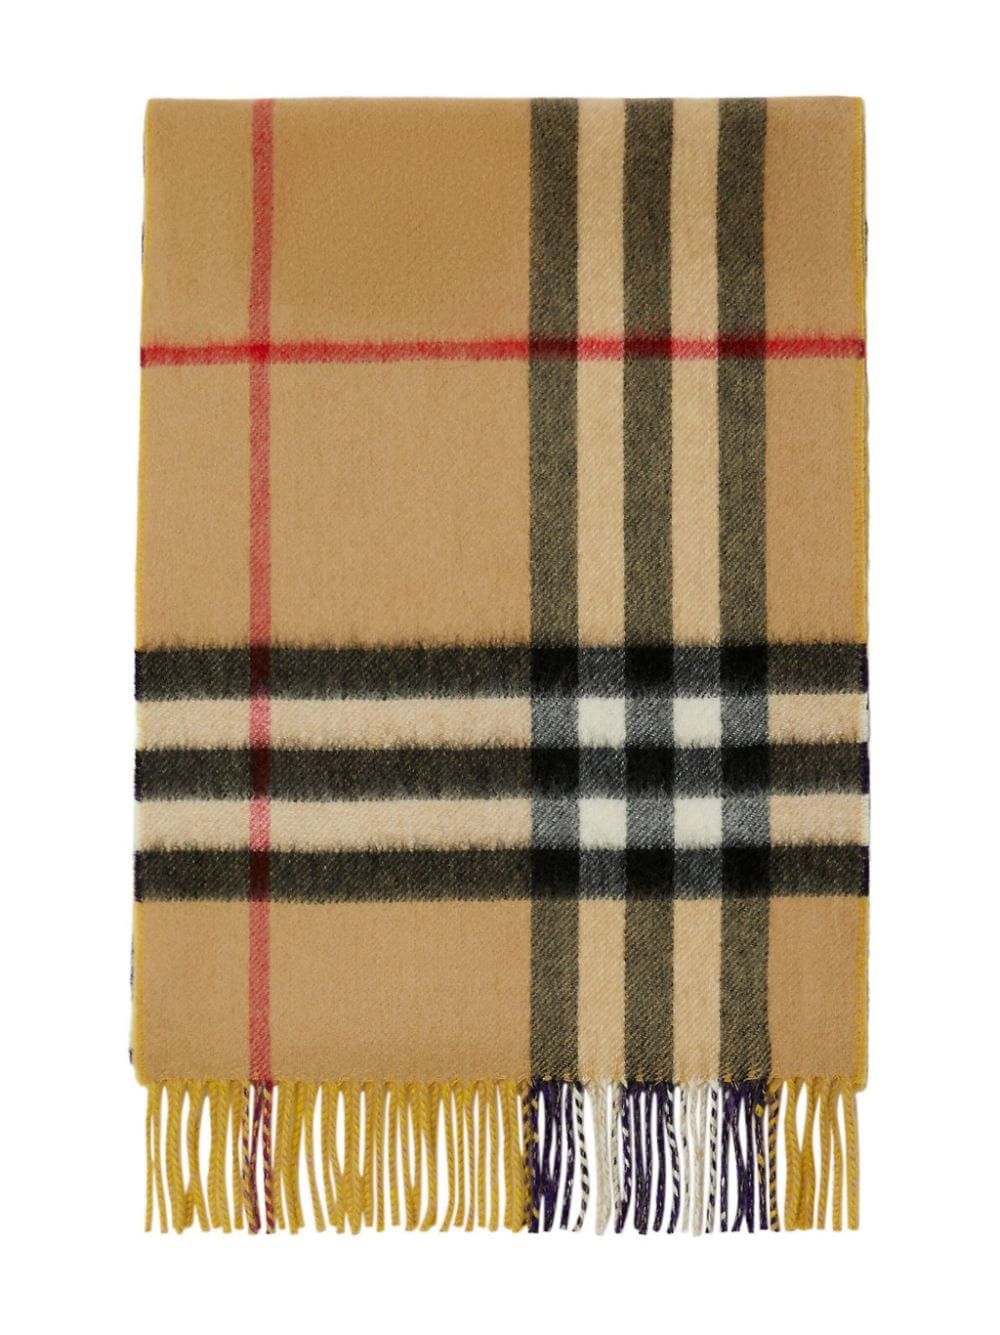 Mustard Yellow Check Cashmere Scarf for Women - Size 168x30 cm